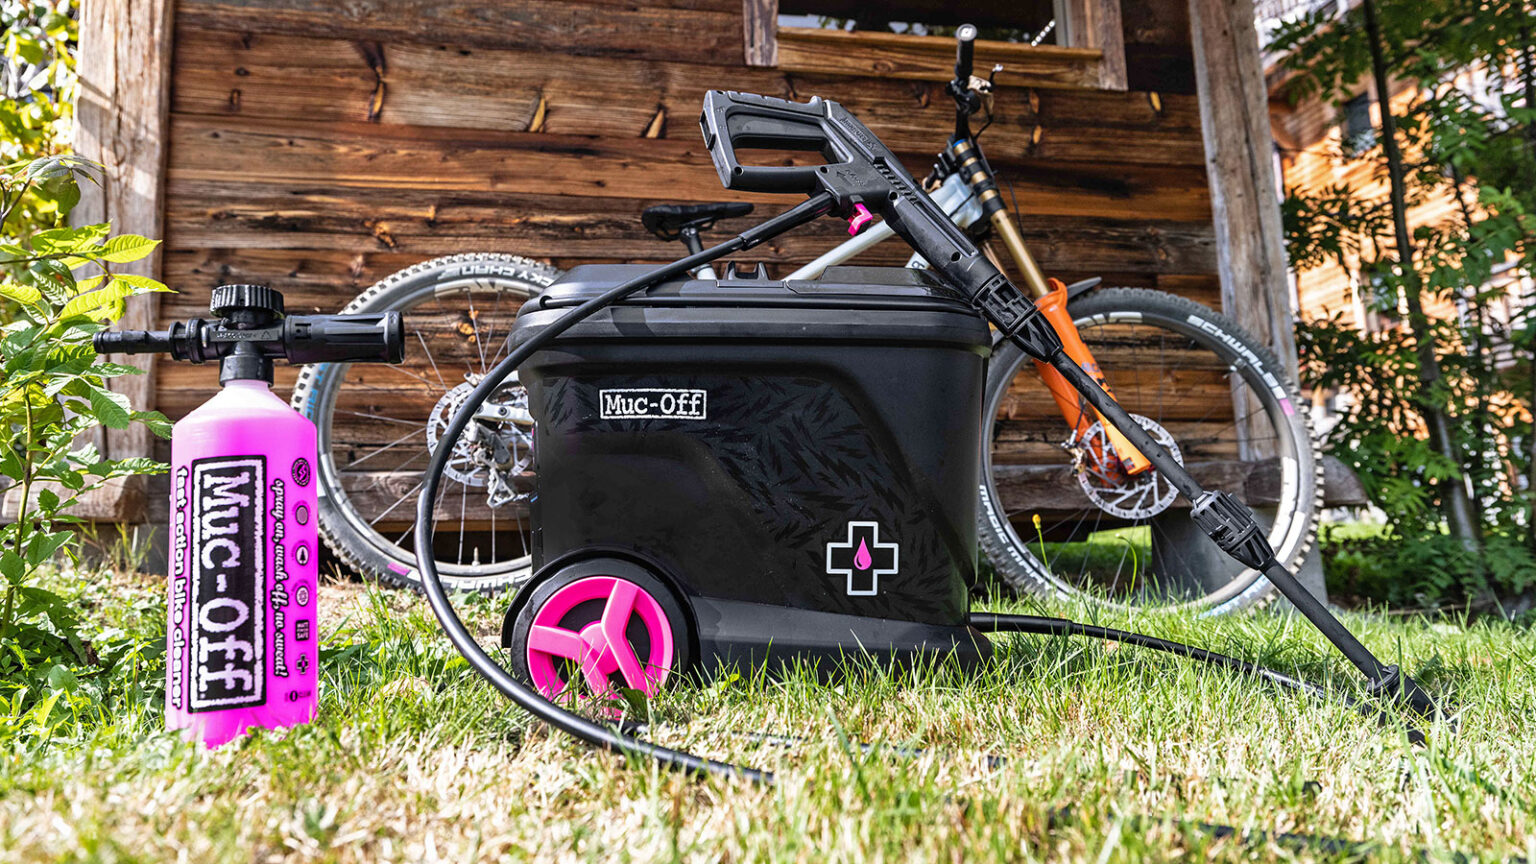 Muc-Off Mobile Bike Pressure Washer, portable rechargeable clean your bicycles in your backyard